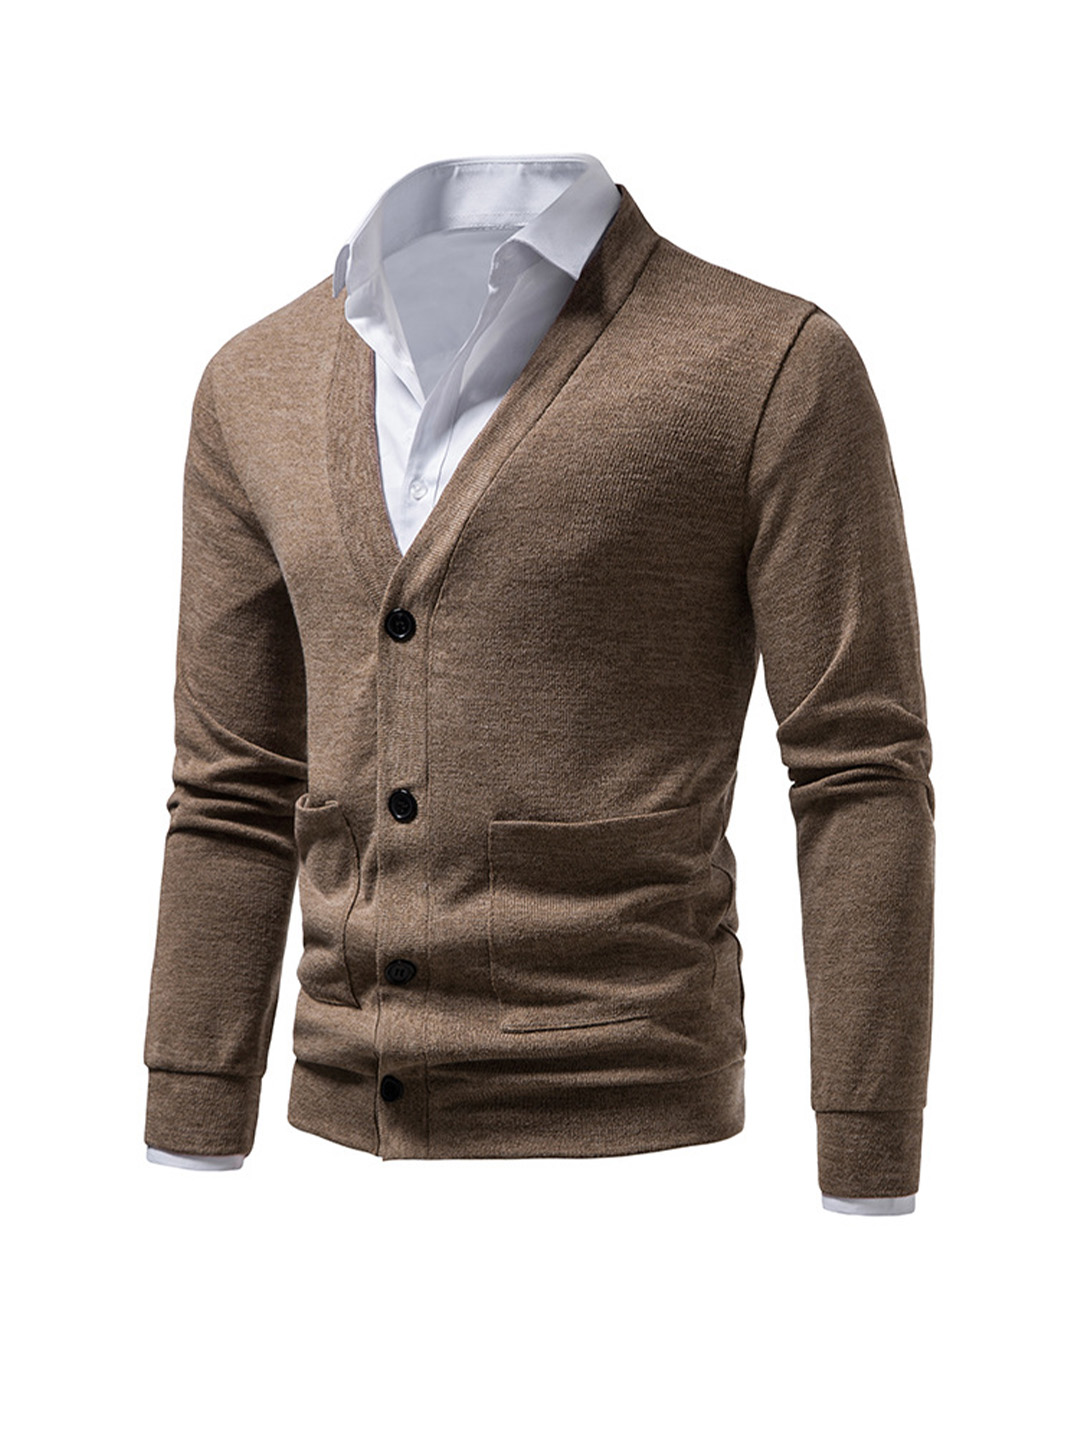 Men's Brent Pocket Casual Cardigan (shirt not included)-poisonstreetwear.com